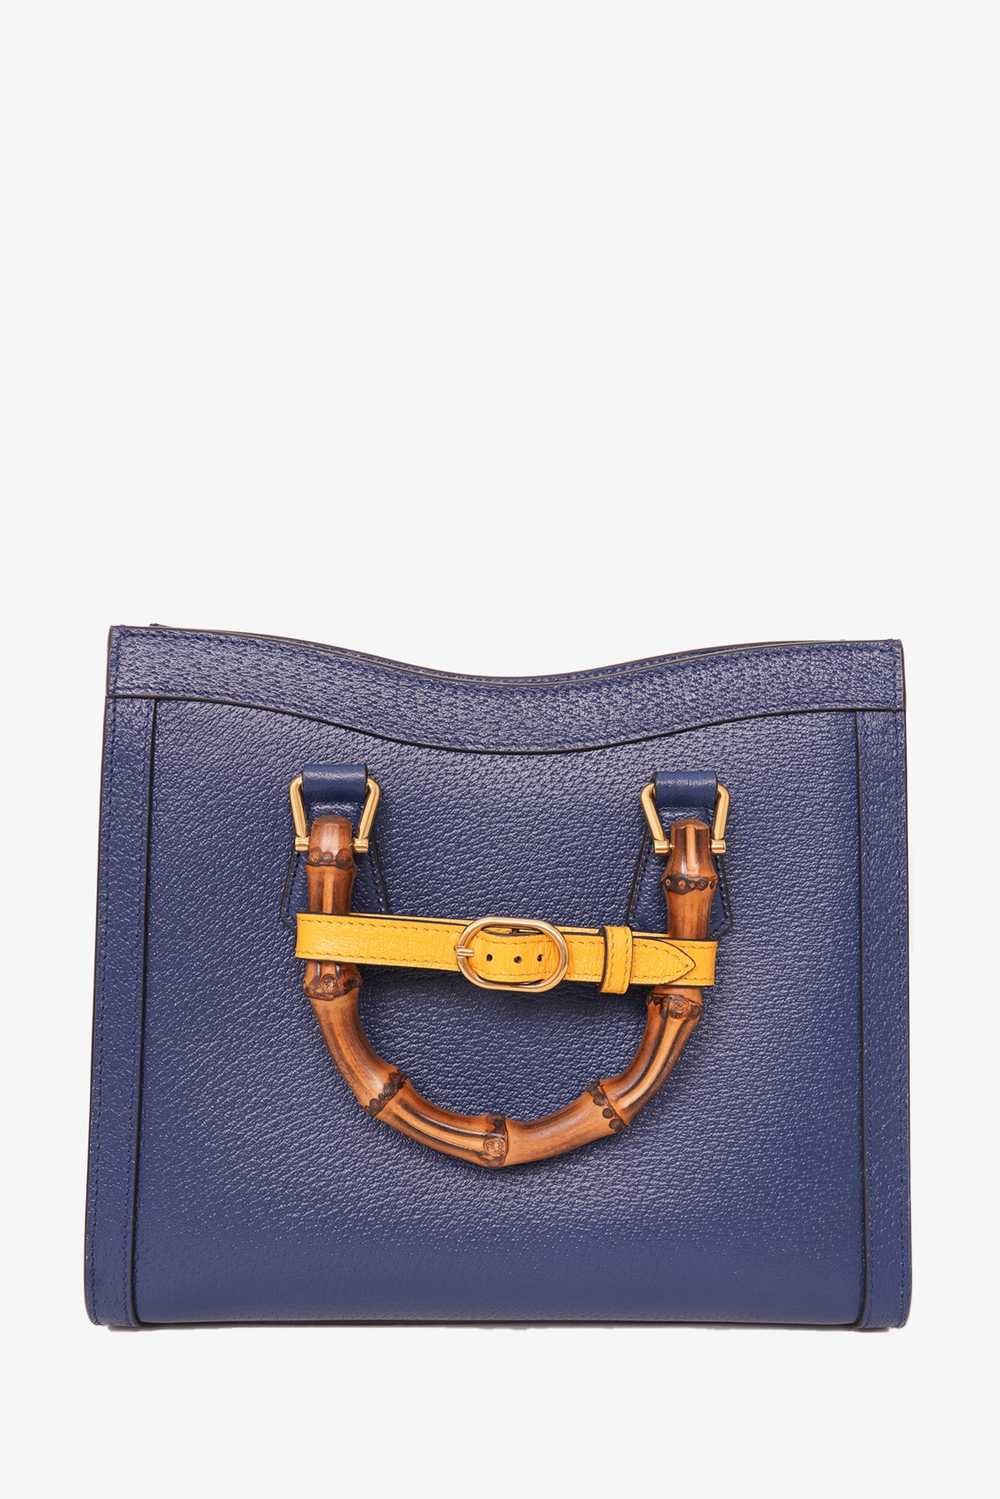 Gucci Blue Leather Diana Small Tote Bag - image 2